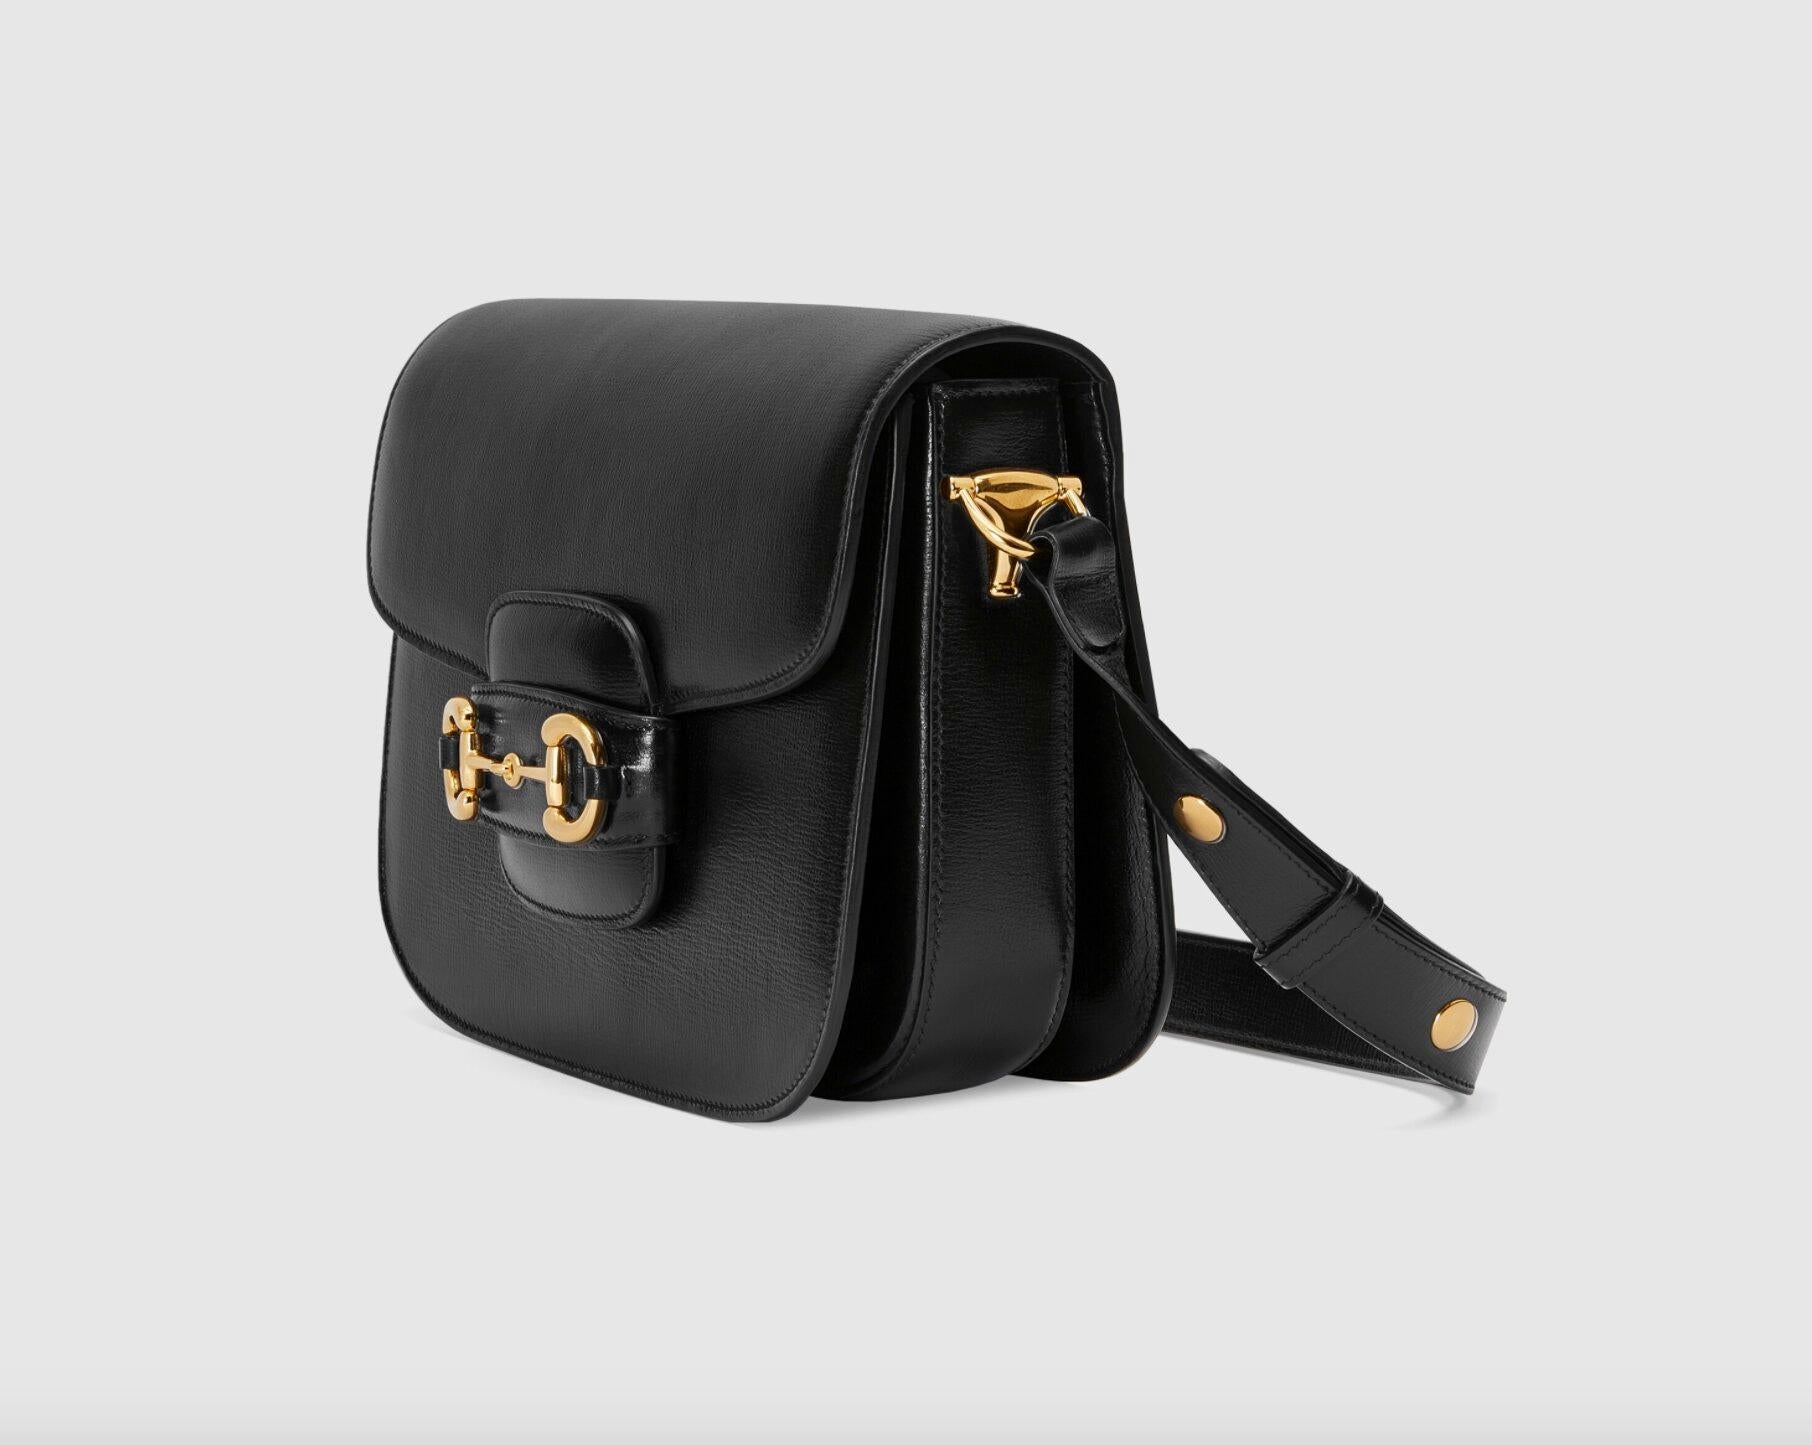 Introduced for Cruise 2020, the Gucci Horsebit 1955 bag is recreated from an archival design. With the same lines and forms first introduced over six decades ago, the accessory unifies the original details with a modern spirit, highlighting the